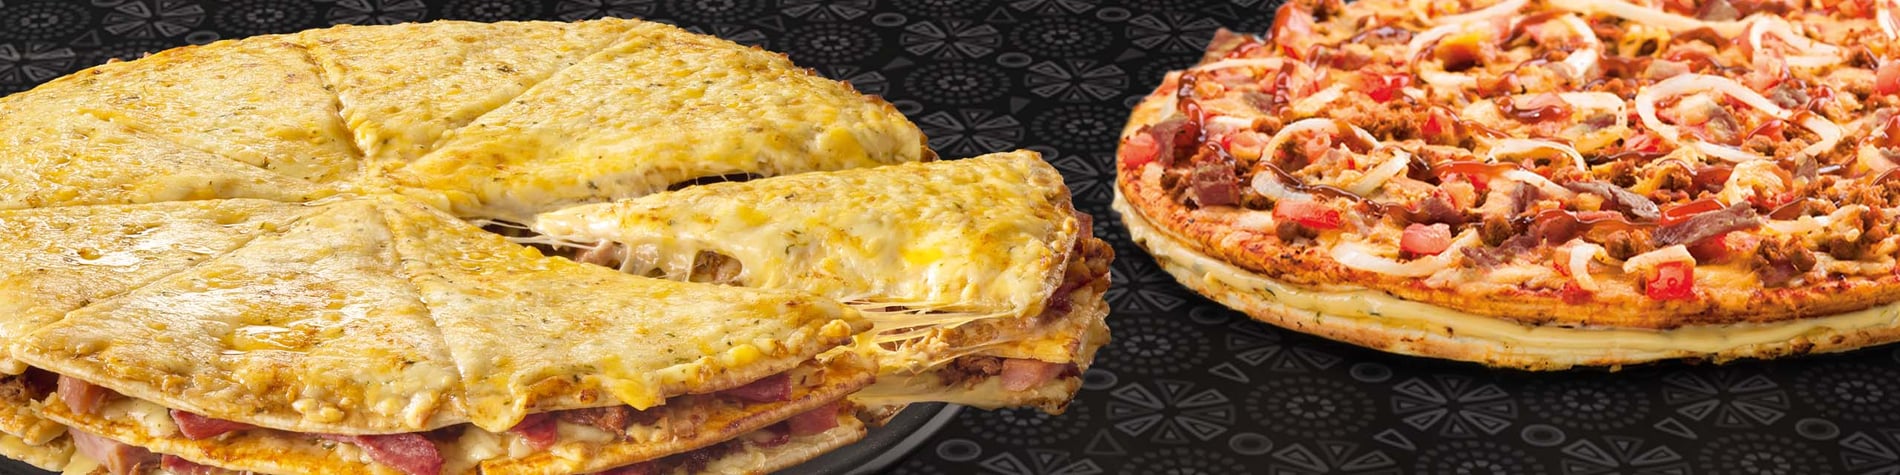 Two large pizzas on a grill placed on a wooden table